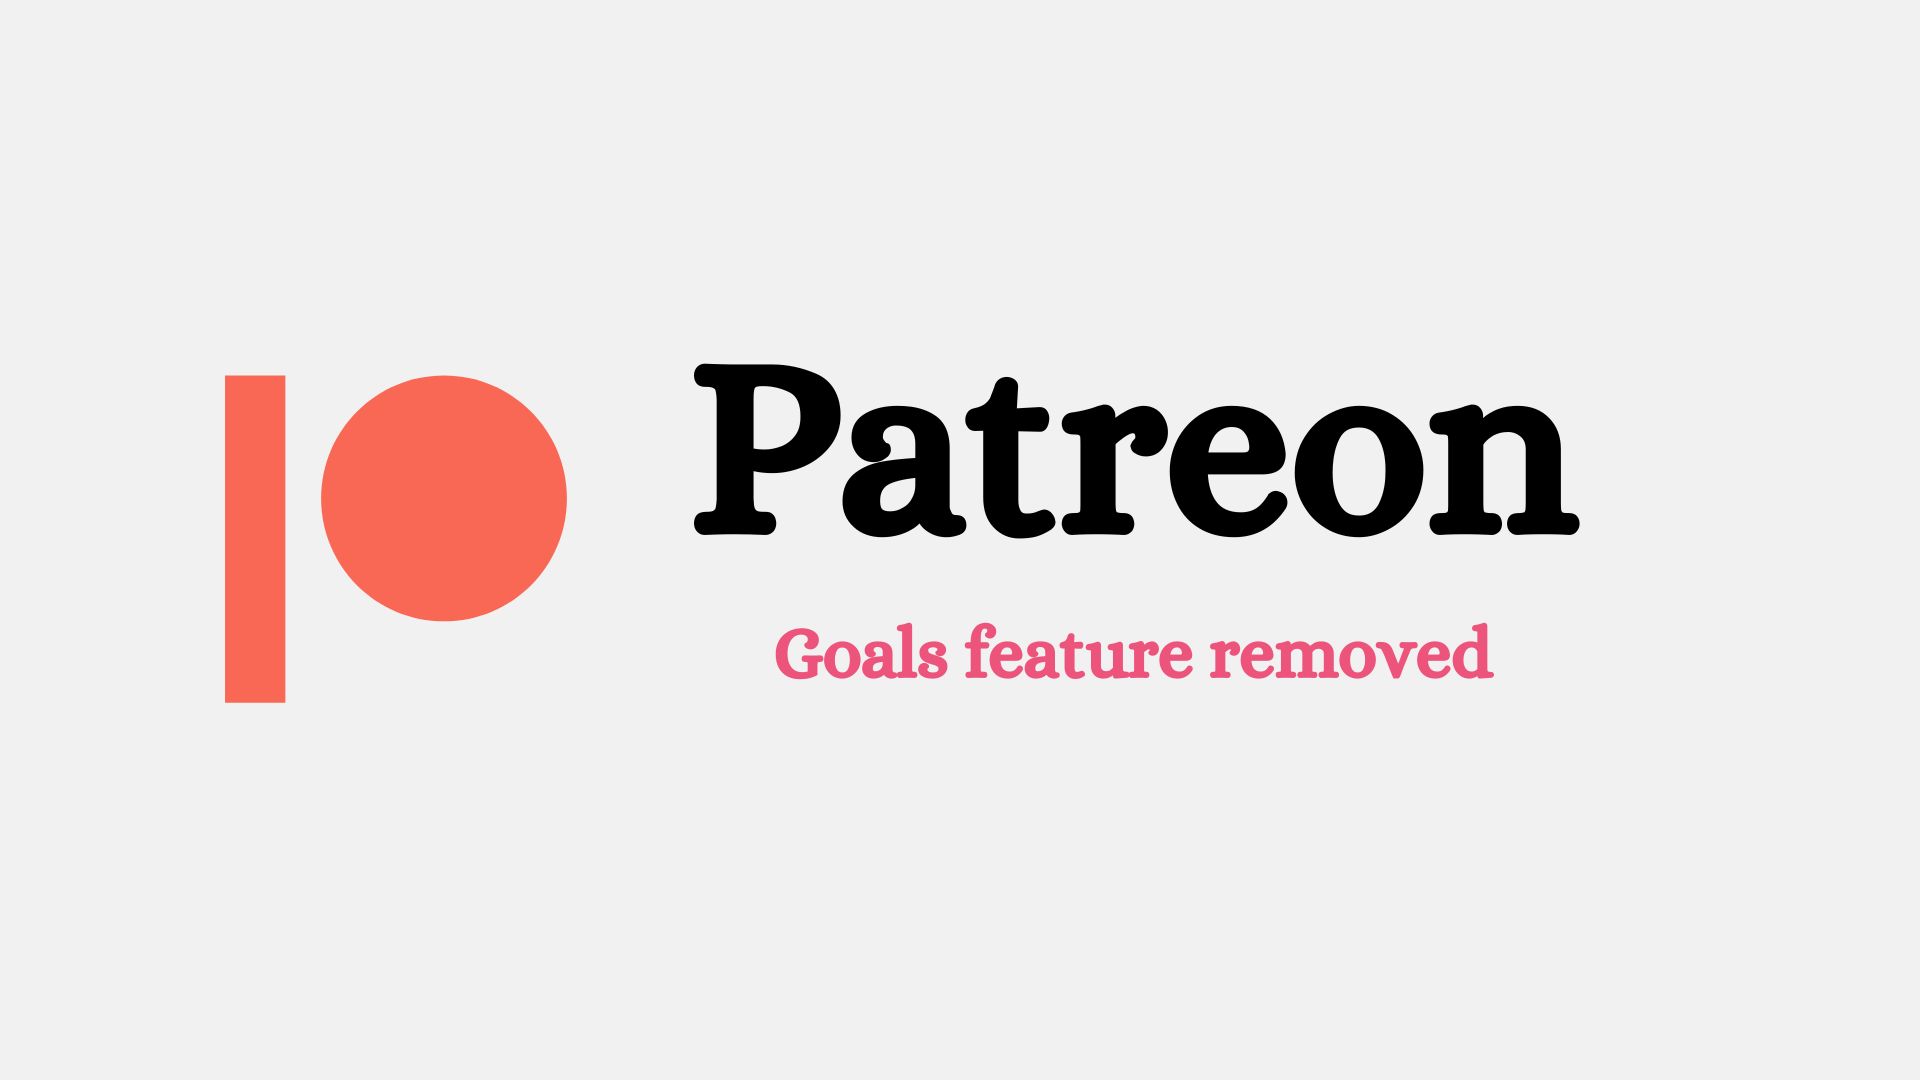 Patreon Goals feature removed